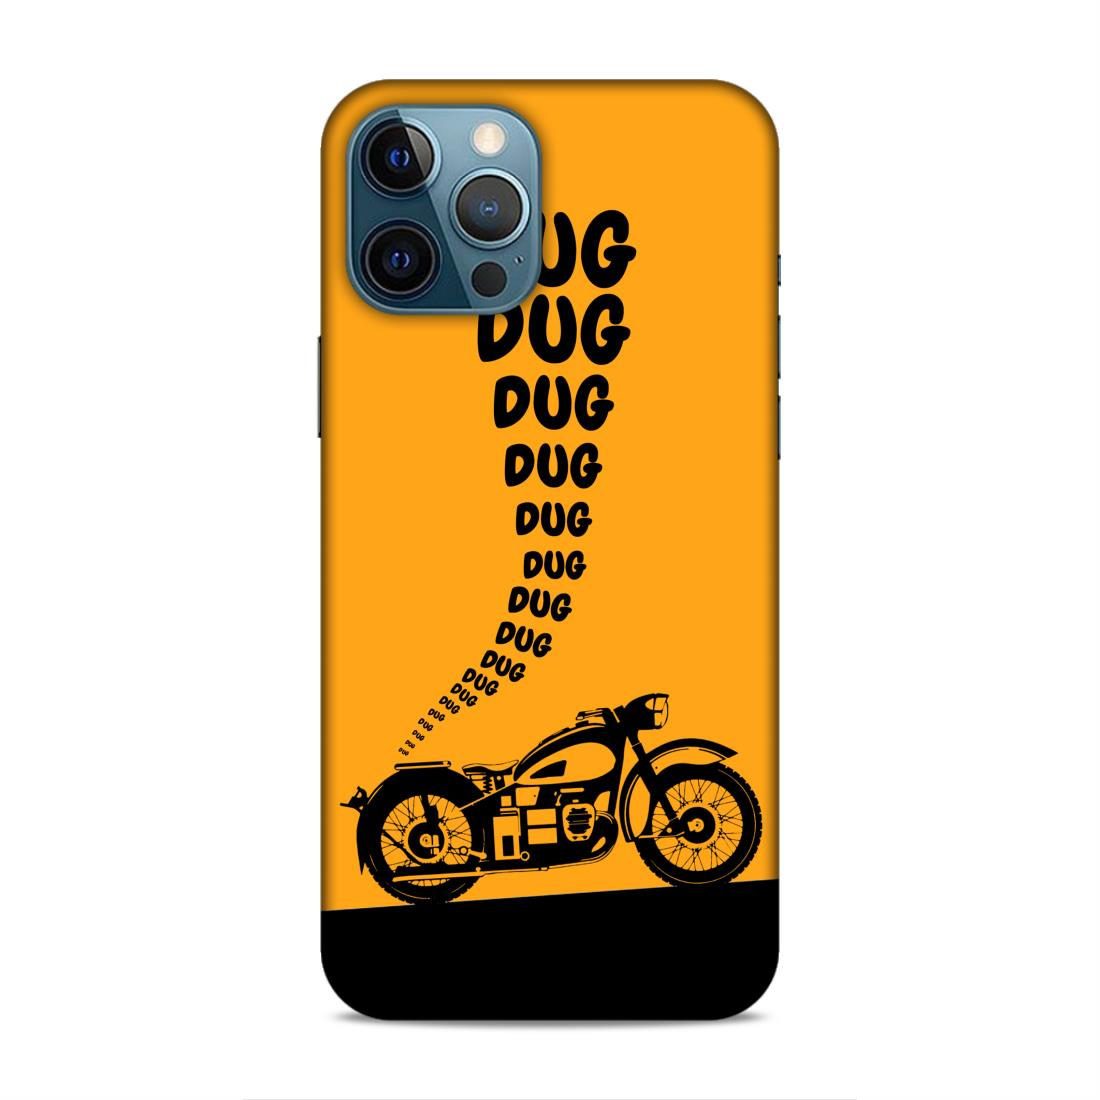 Dug Dug Motor Cycle Hard Back Case For Apple iPhone 12 Pro Max